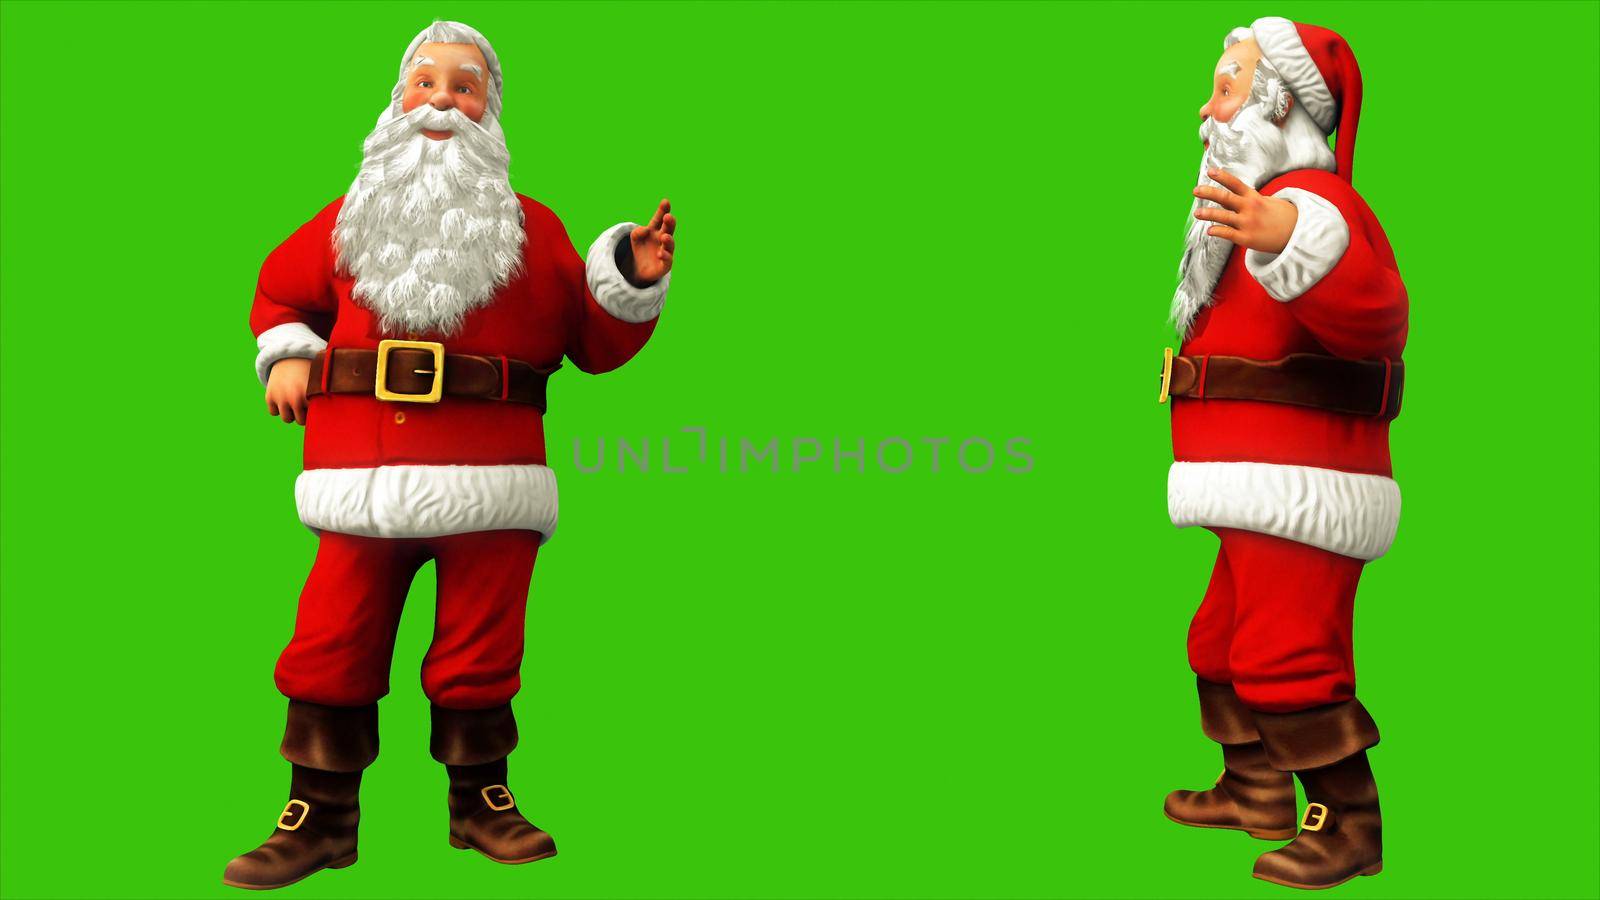 Cheerful Santa Claus is saying something on the green screen during Christmas.